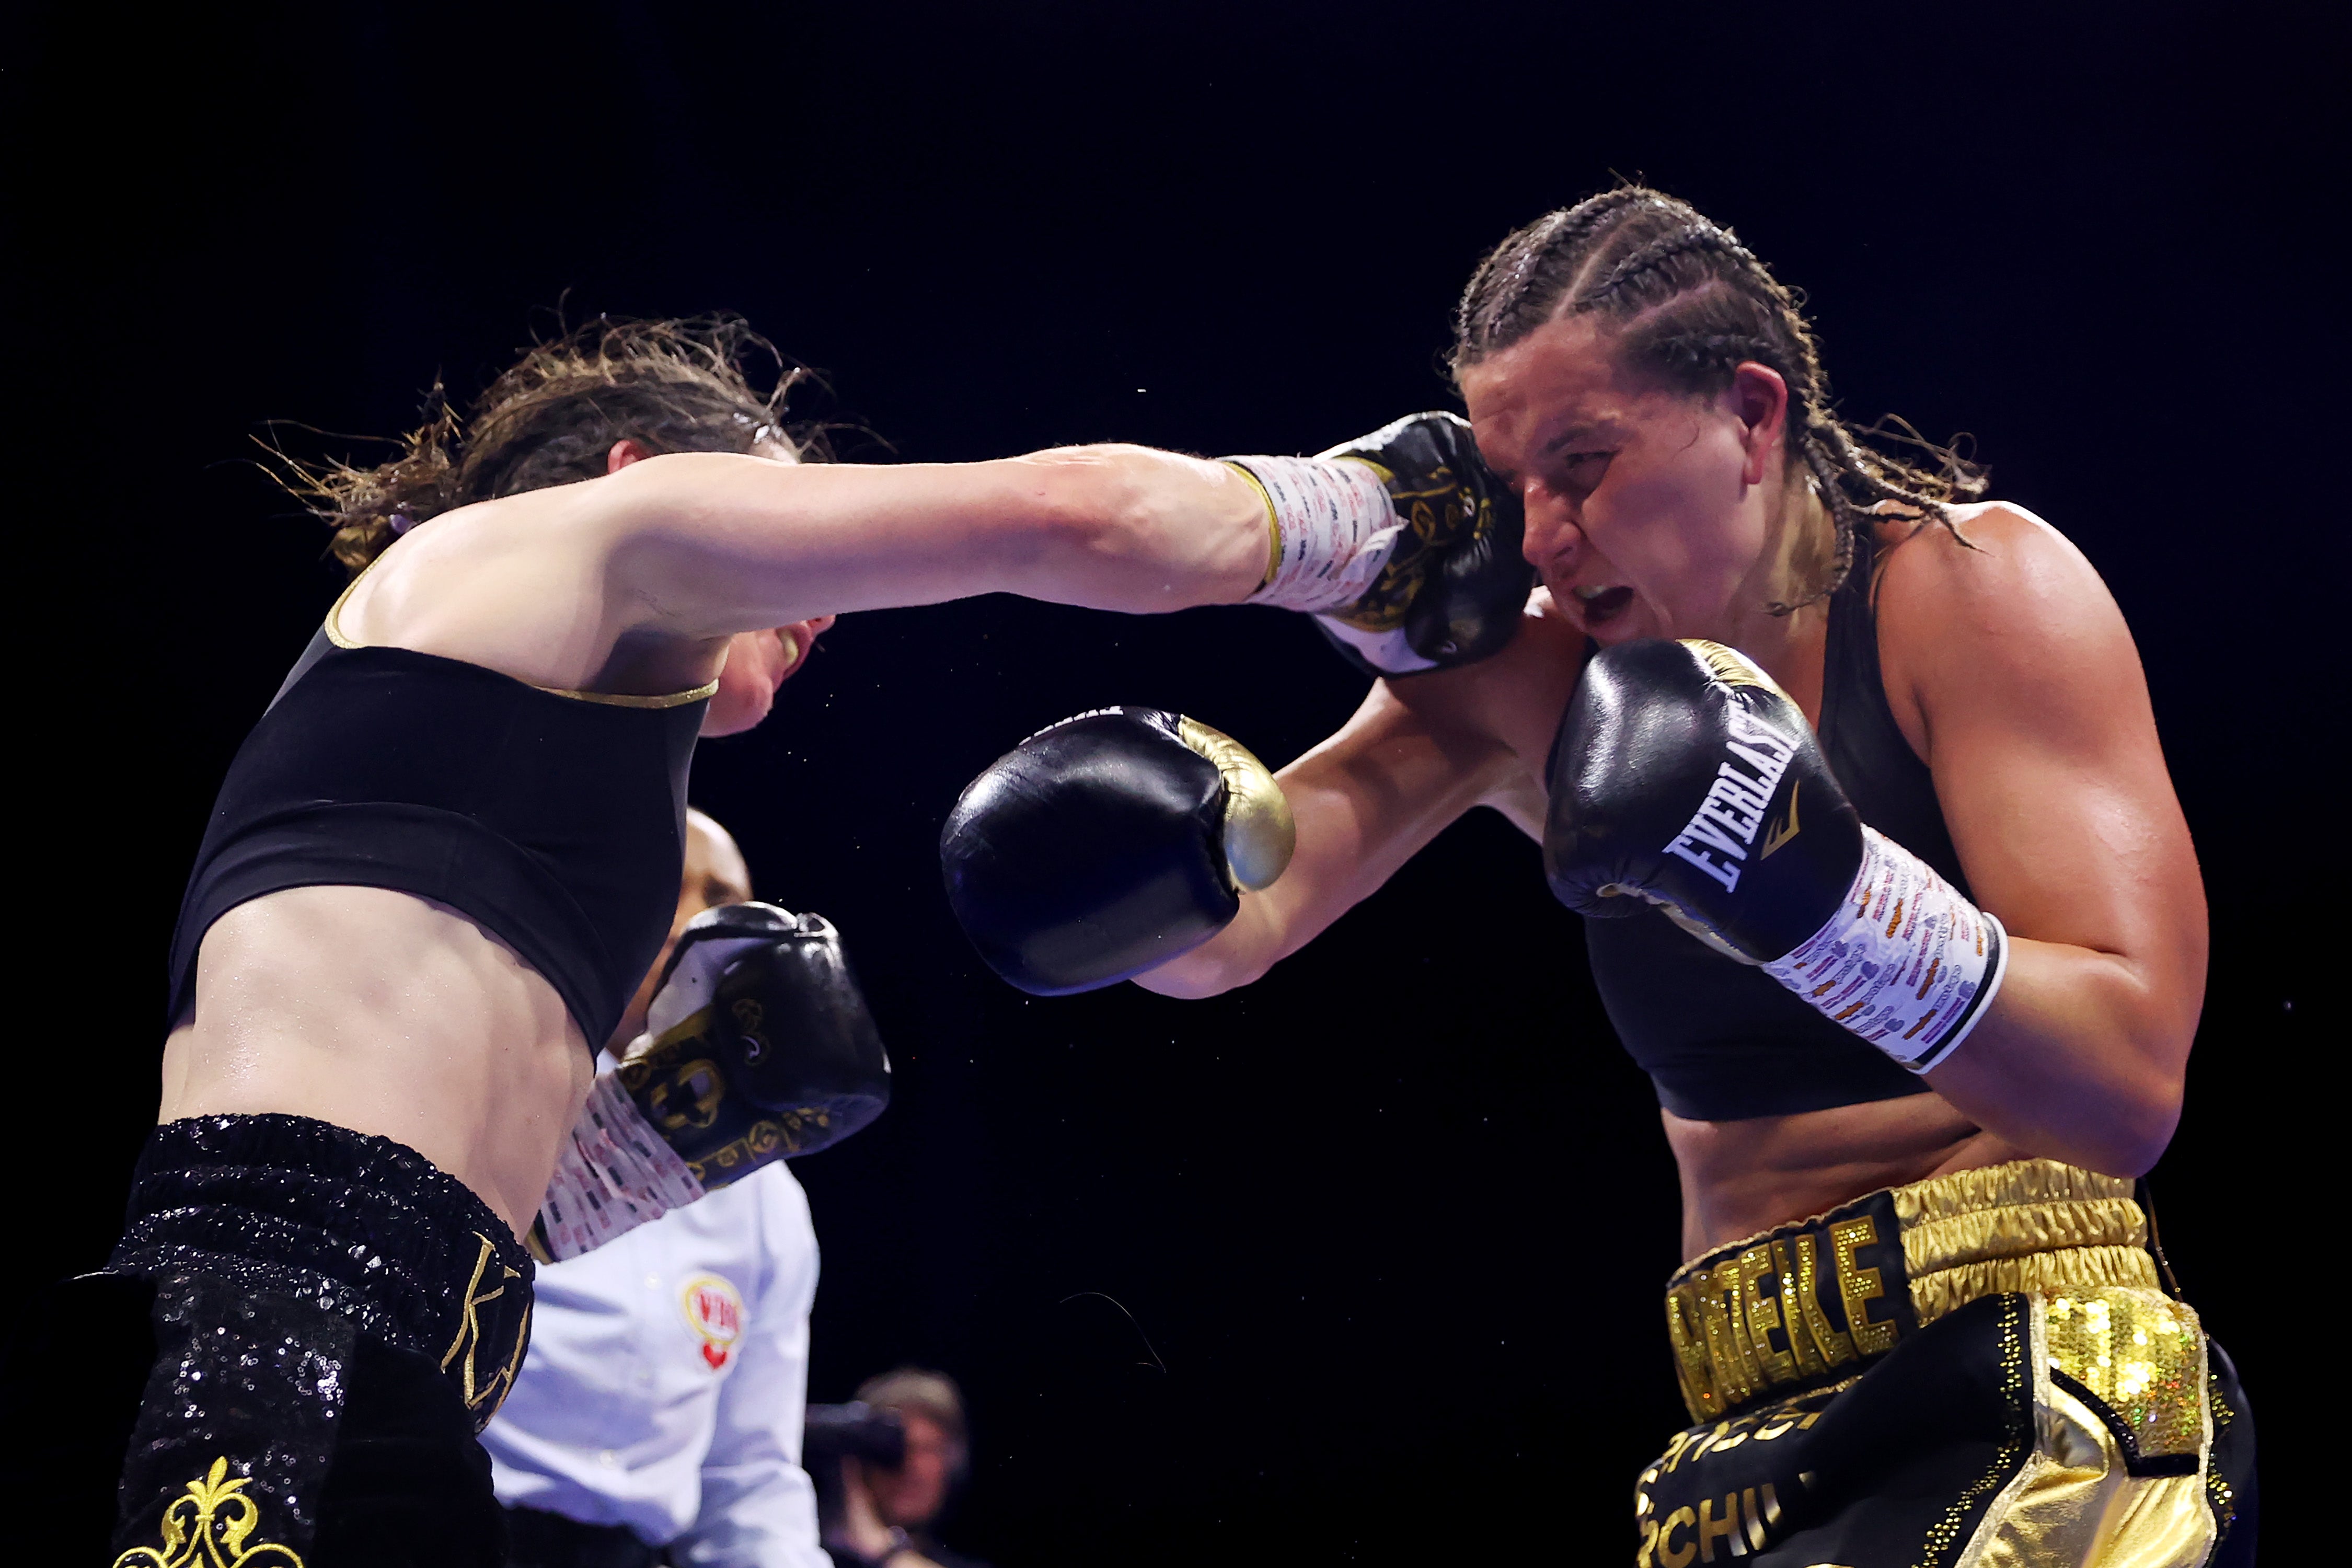 Katie Taylors long reign as boxing queen over despite heroic last stand The Independent